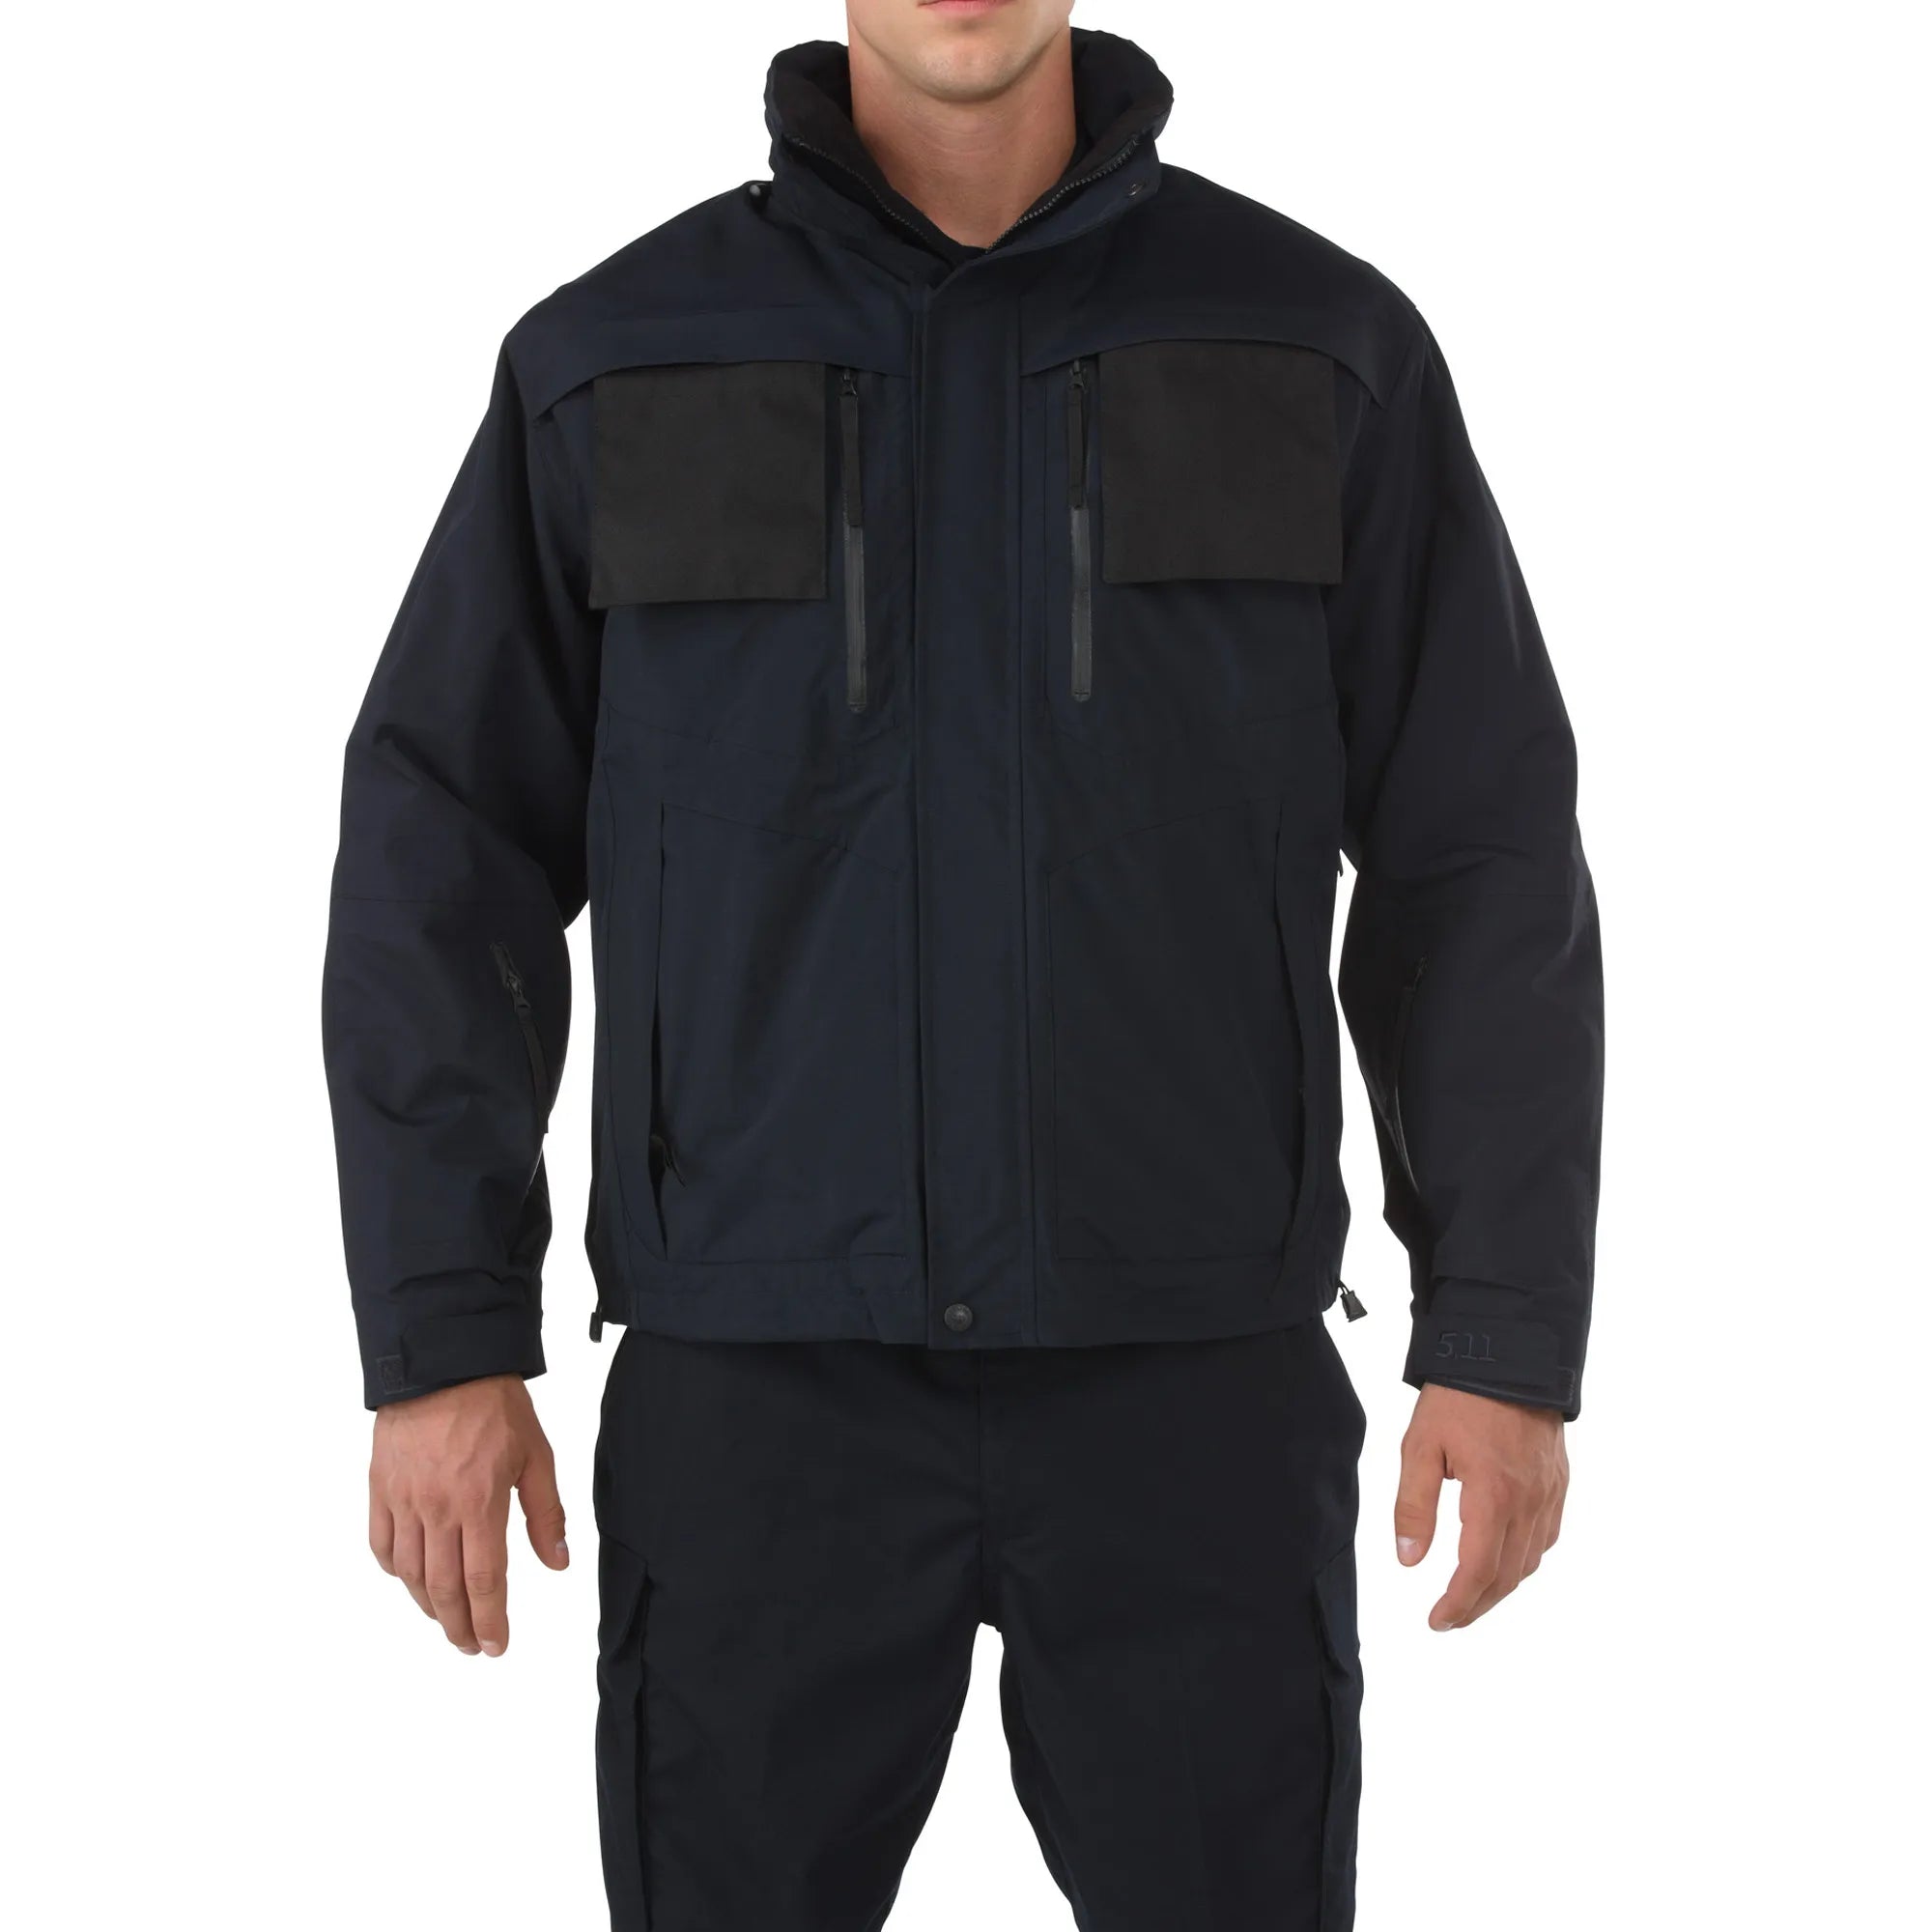 5.11 Tactical Valiant Police Duty Jacket 48153 - Clothing & Accessories